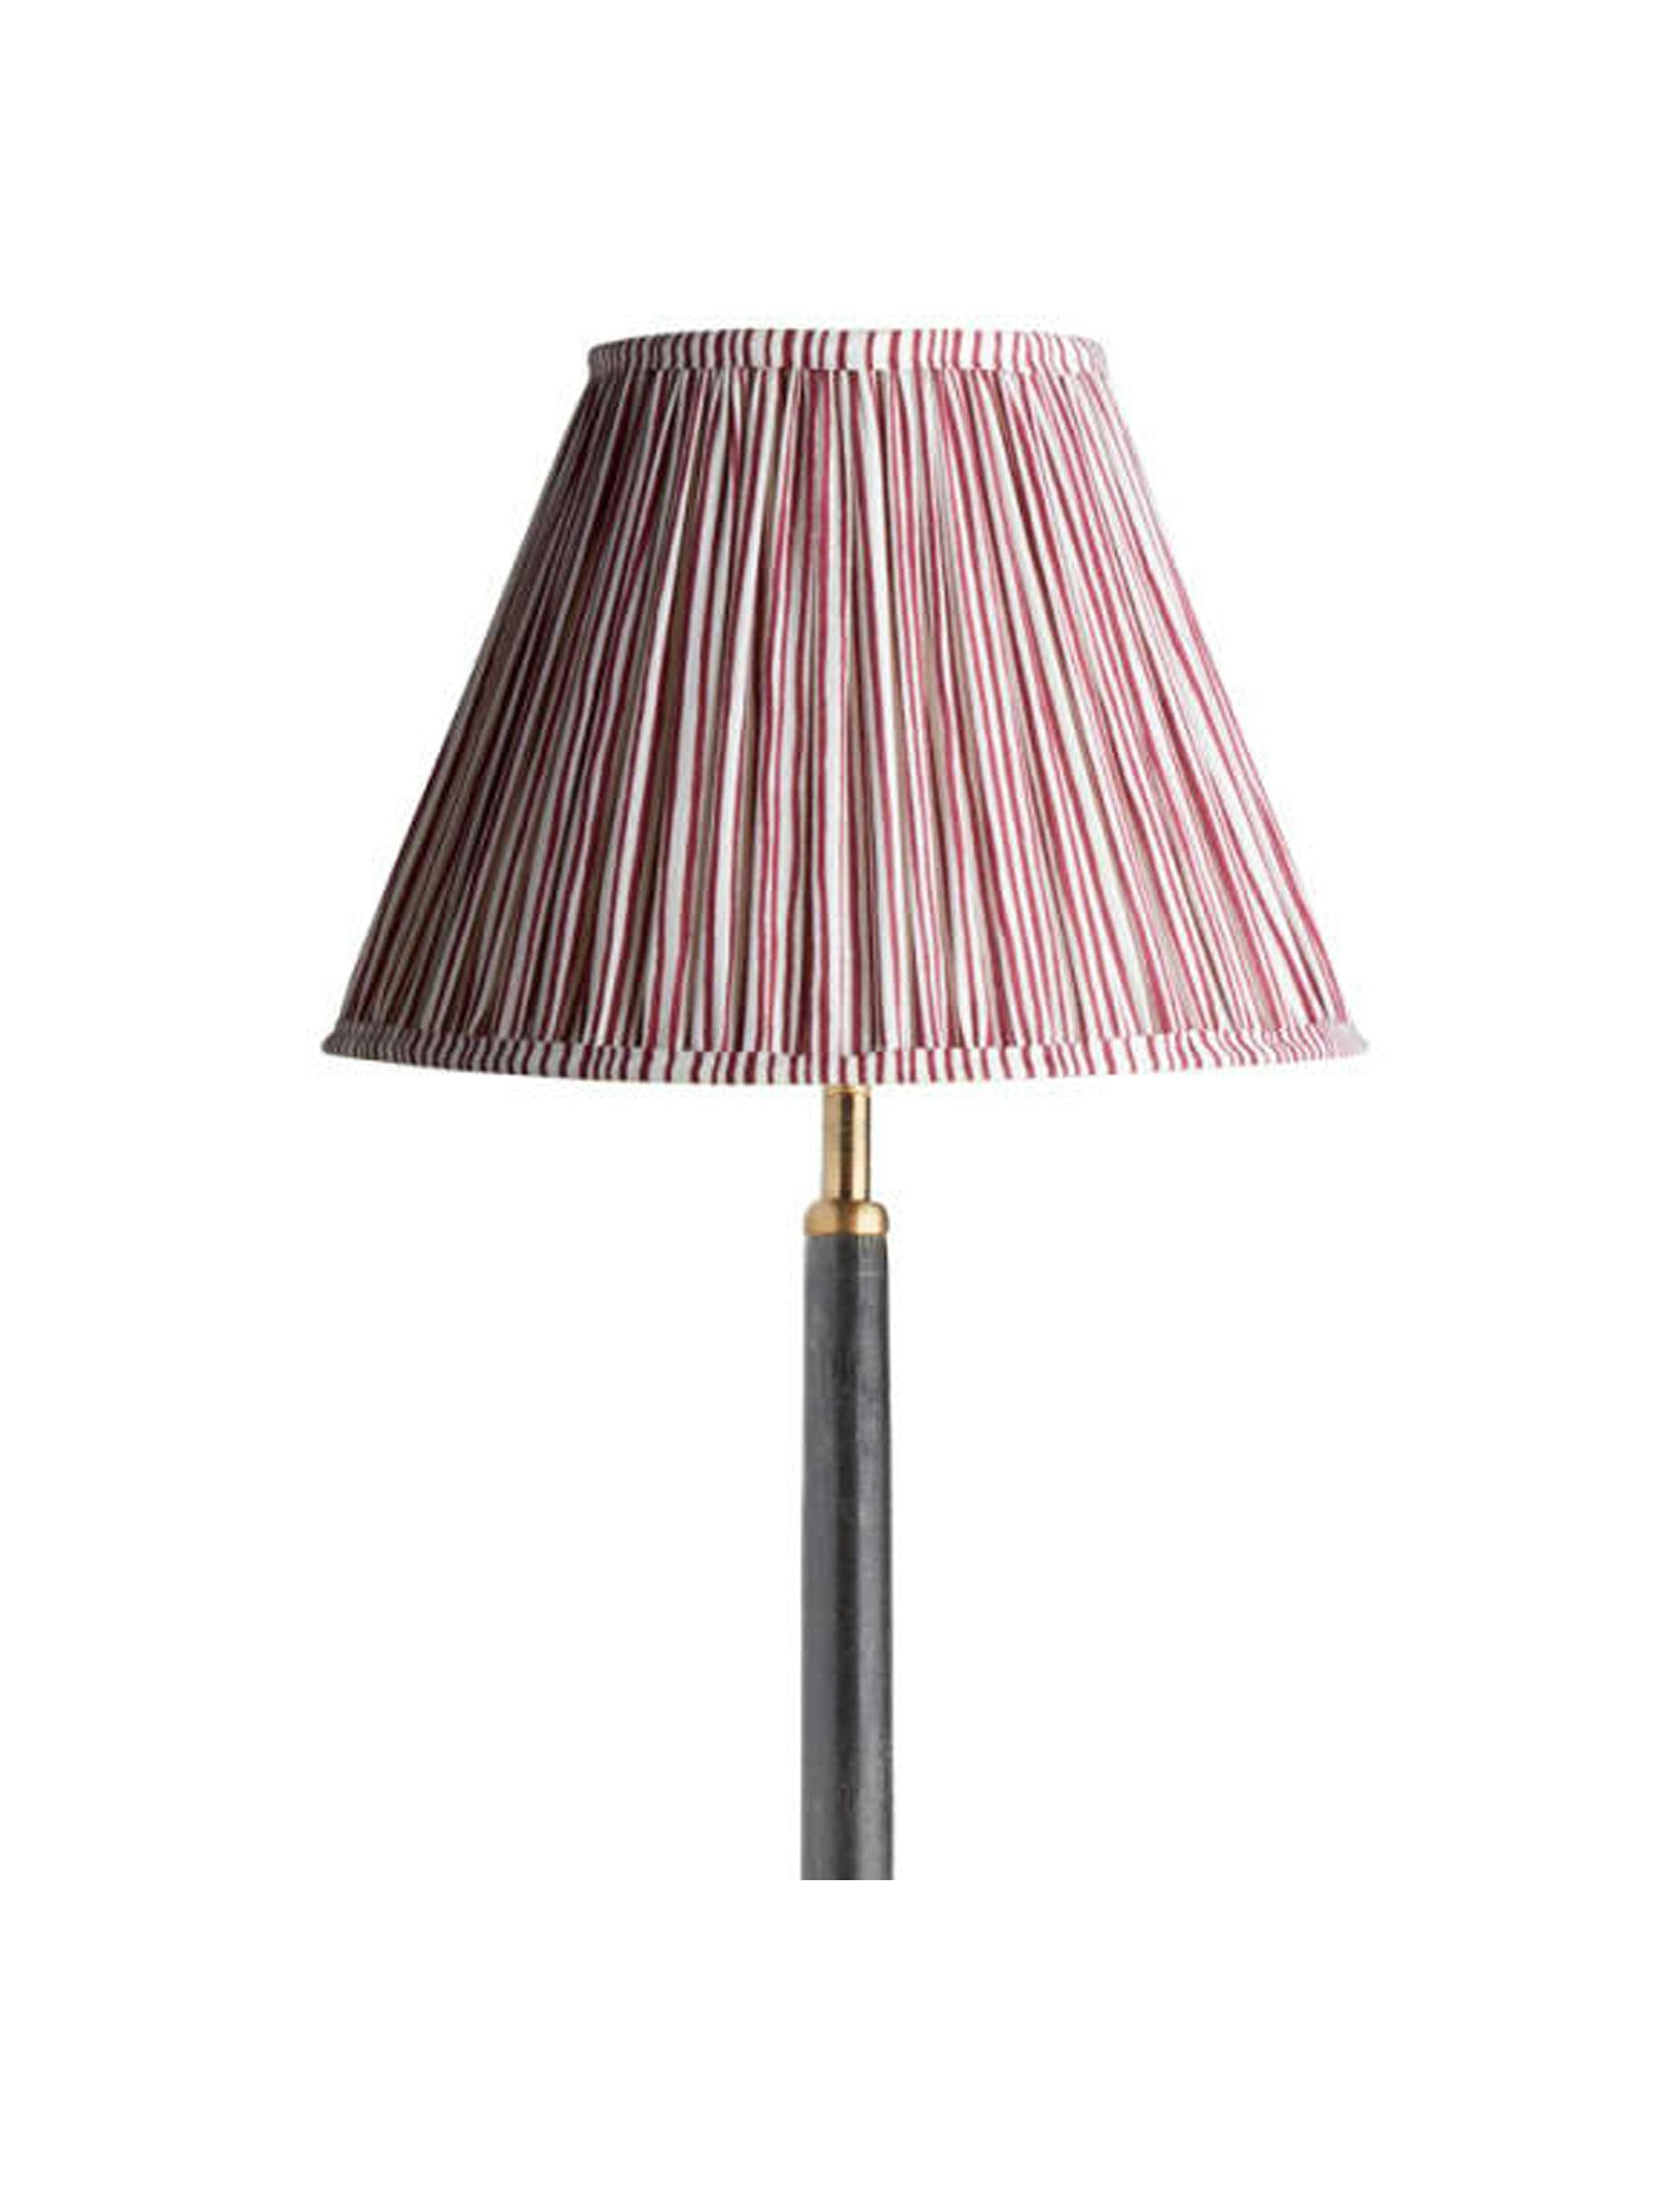 25cm empire shade in ruby candy stripe